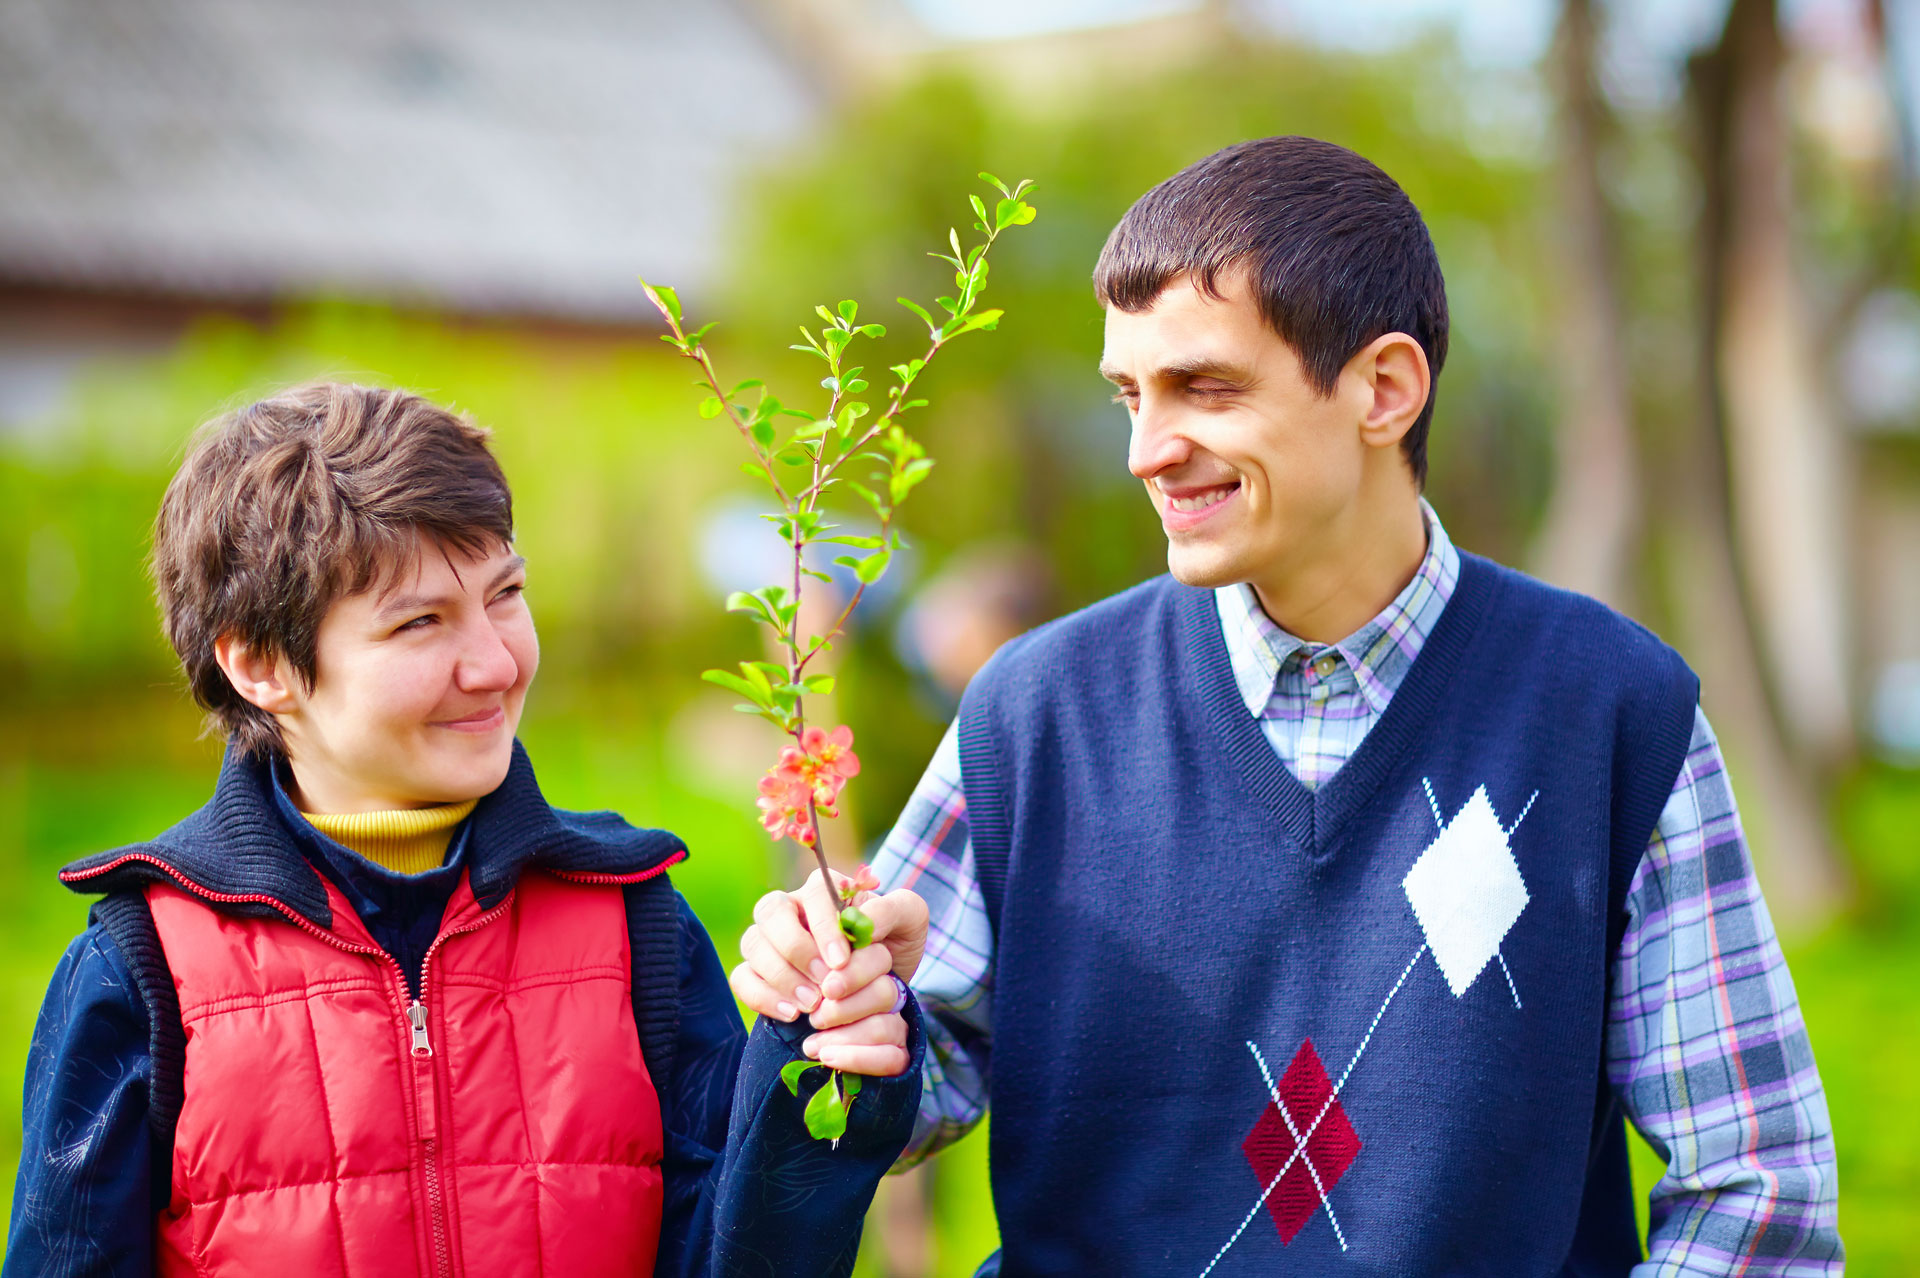 male and female adults with special needs holding a flower